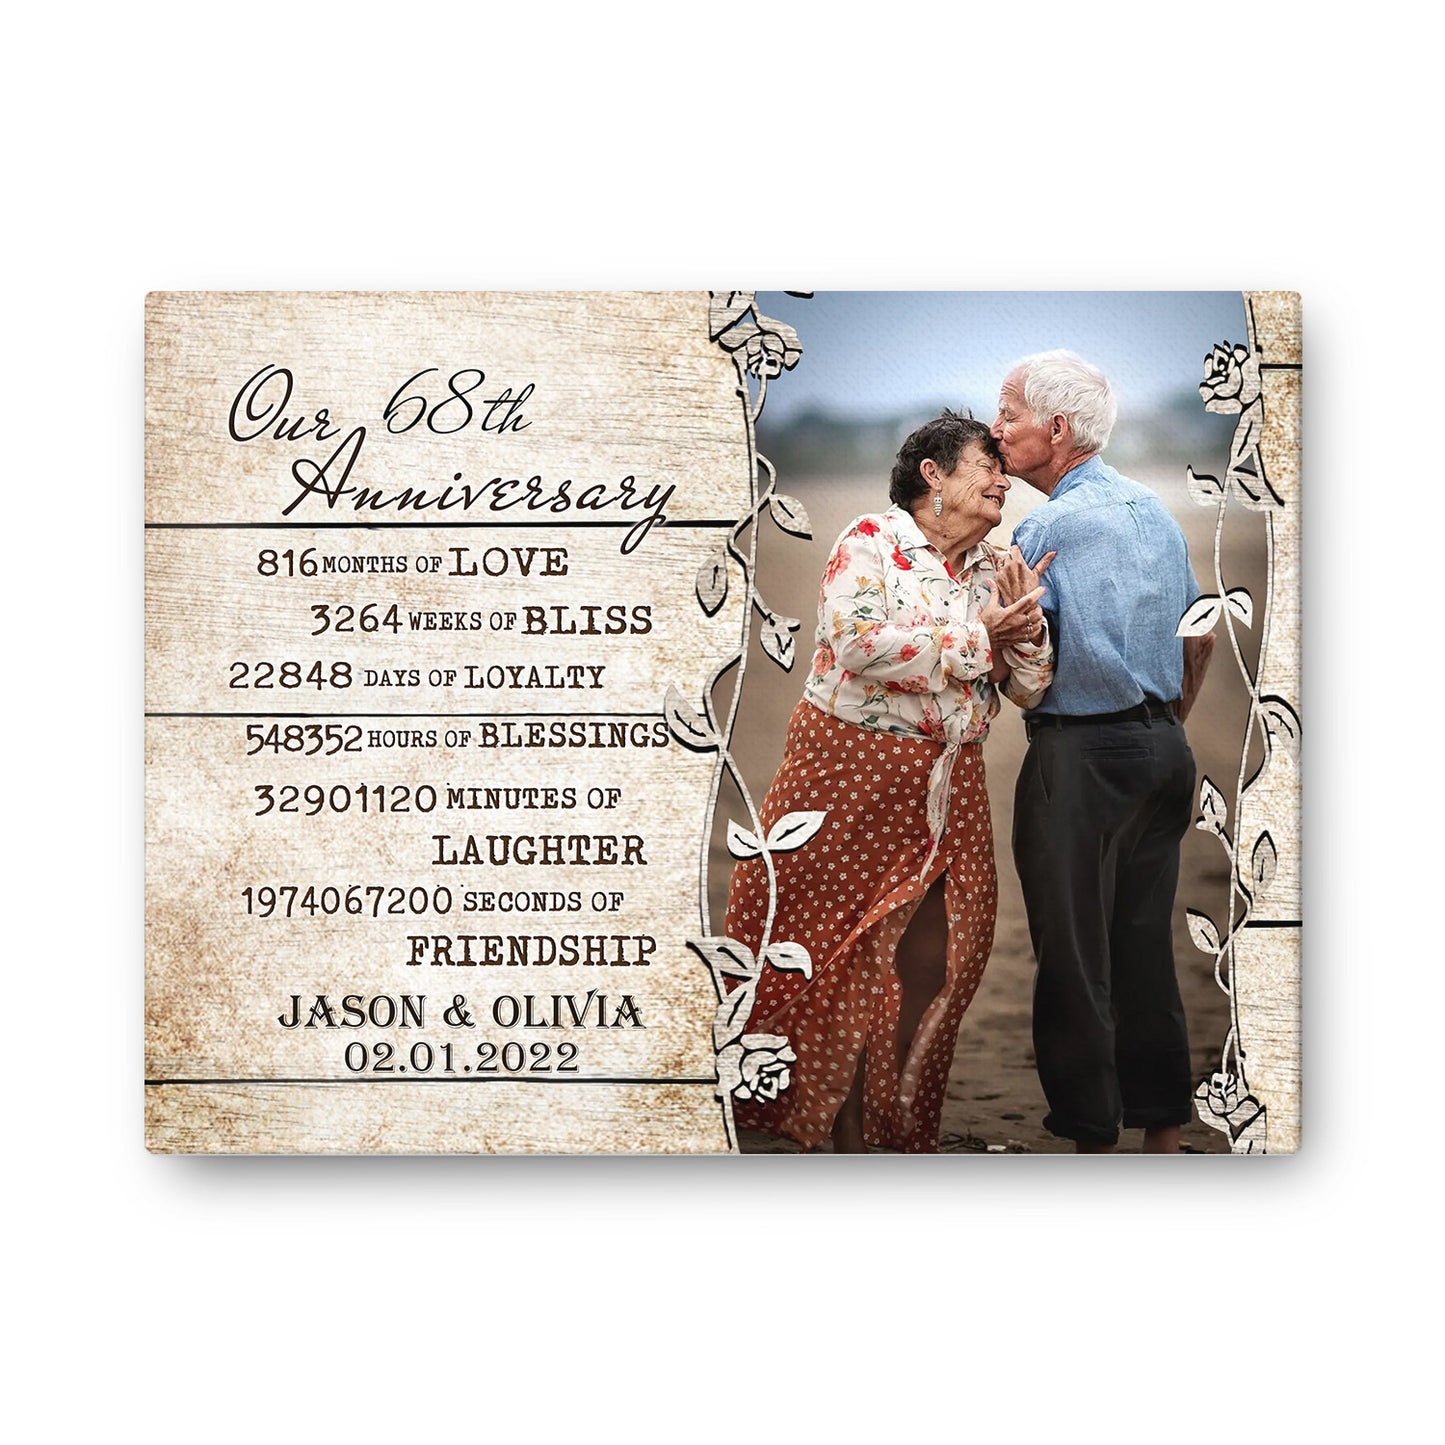 Our 68th Anniversary Timeless love Valentine Gift Personalized Canvas